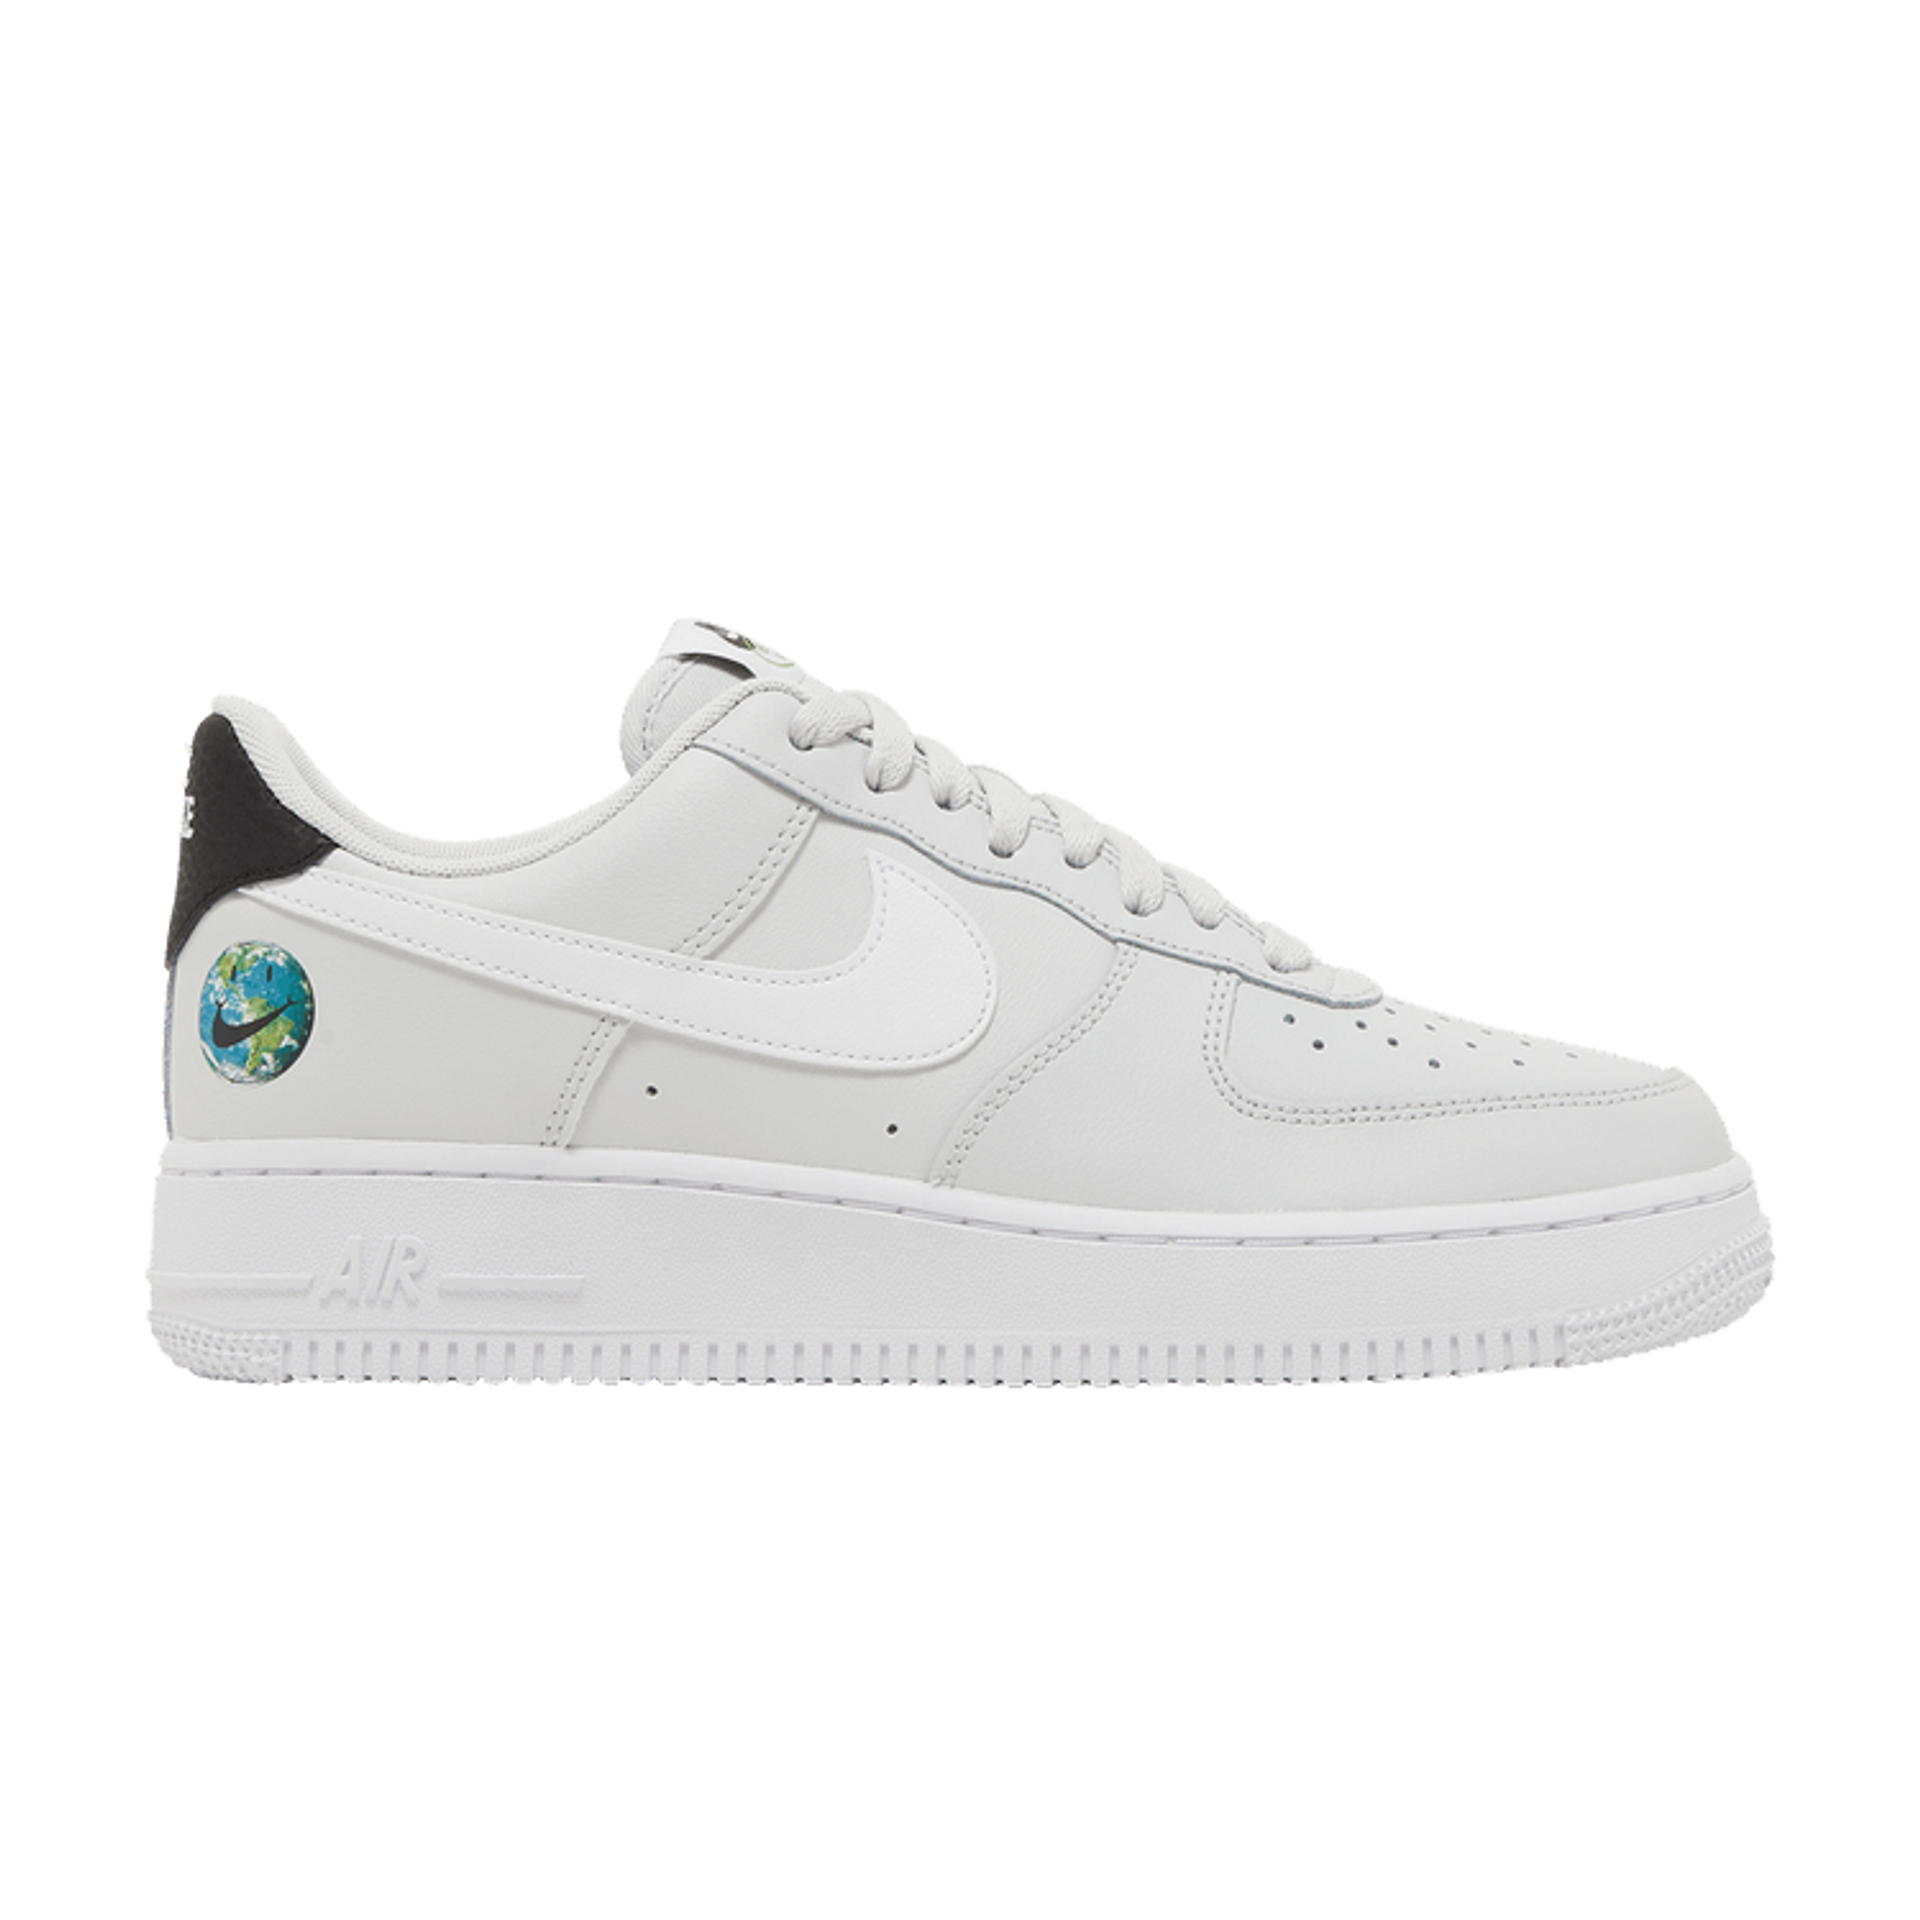 Air Force 1 '07 LV8 2 'Have A Nike Day - Earth'